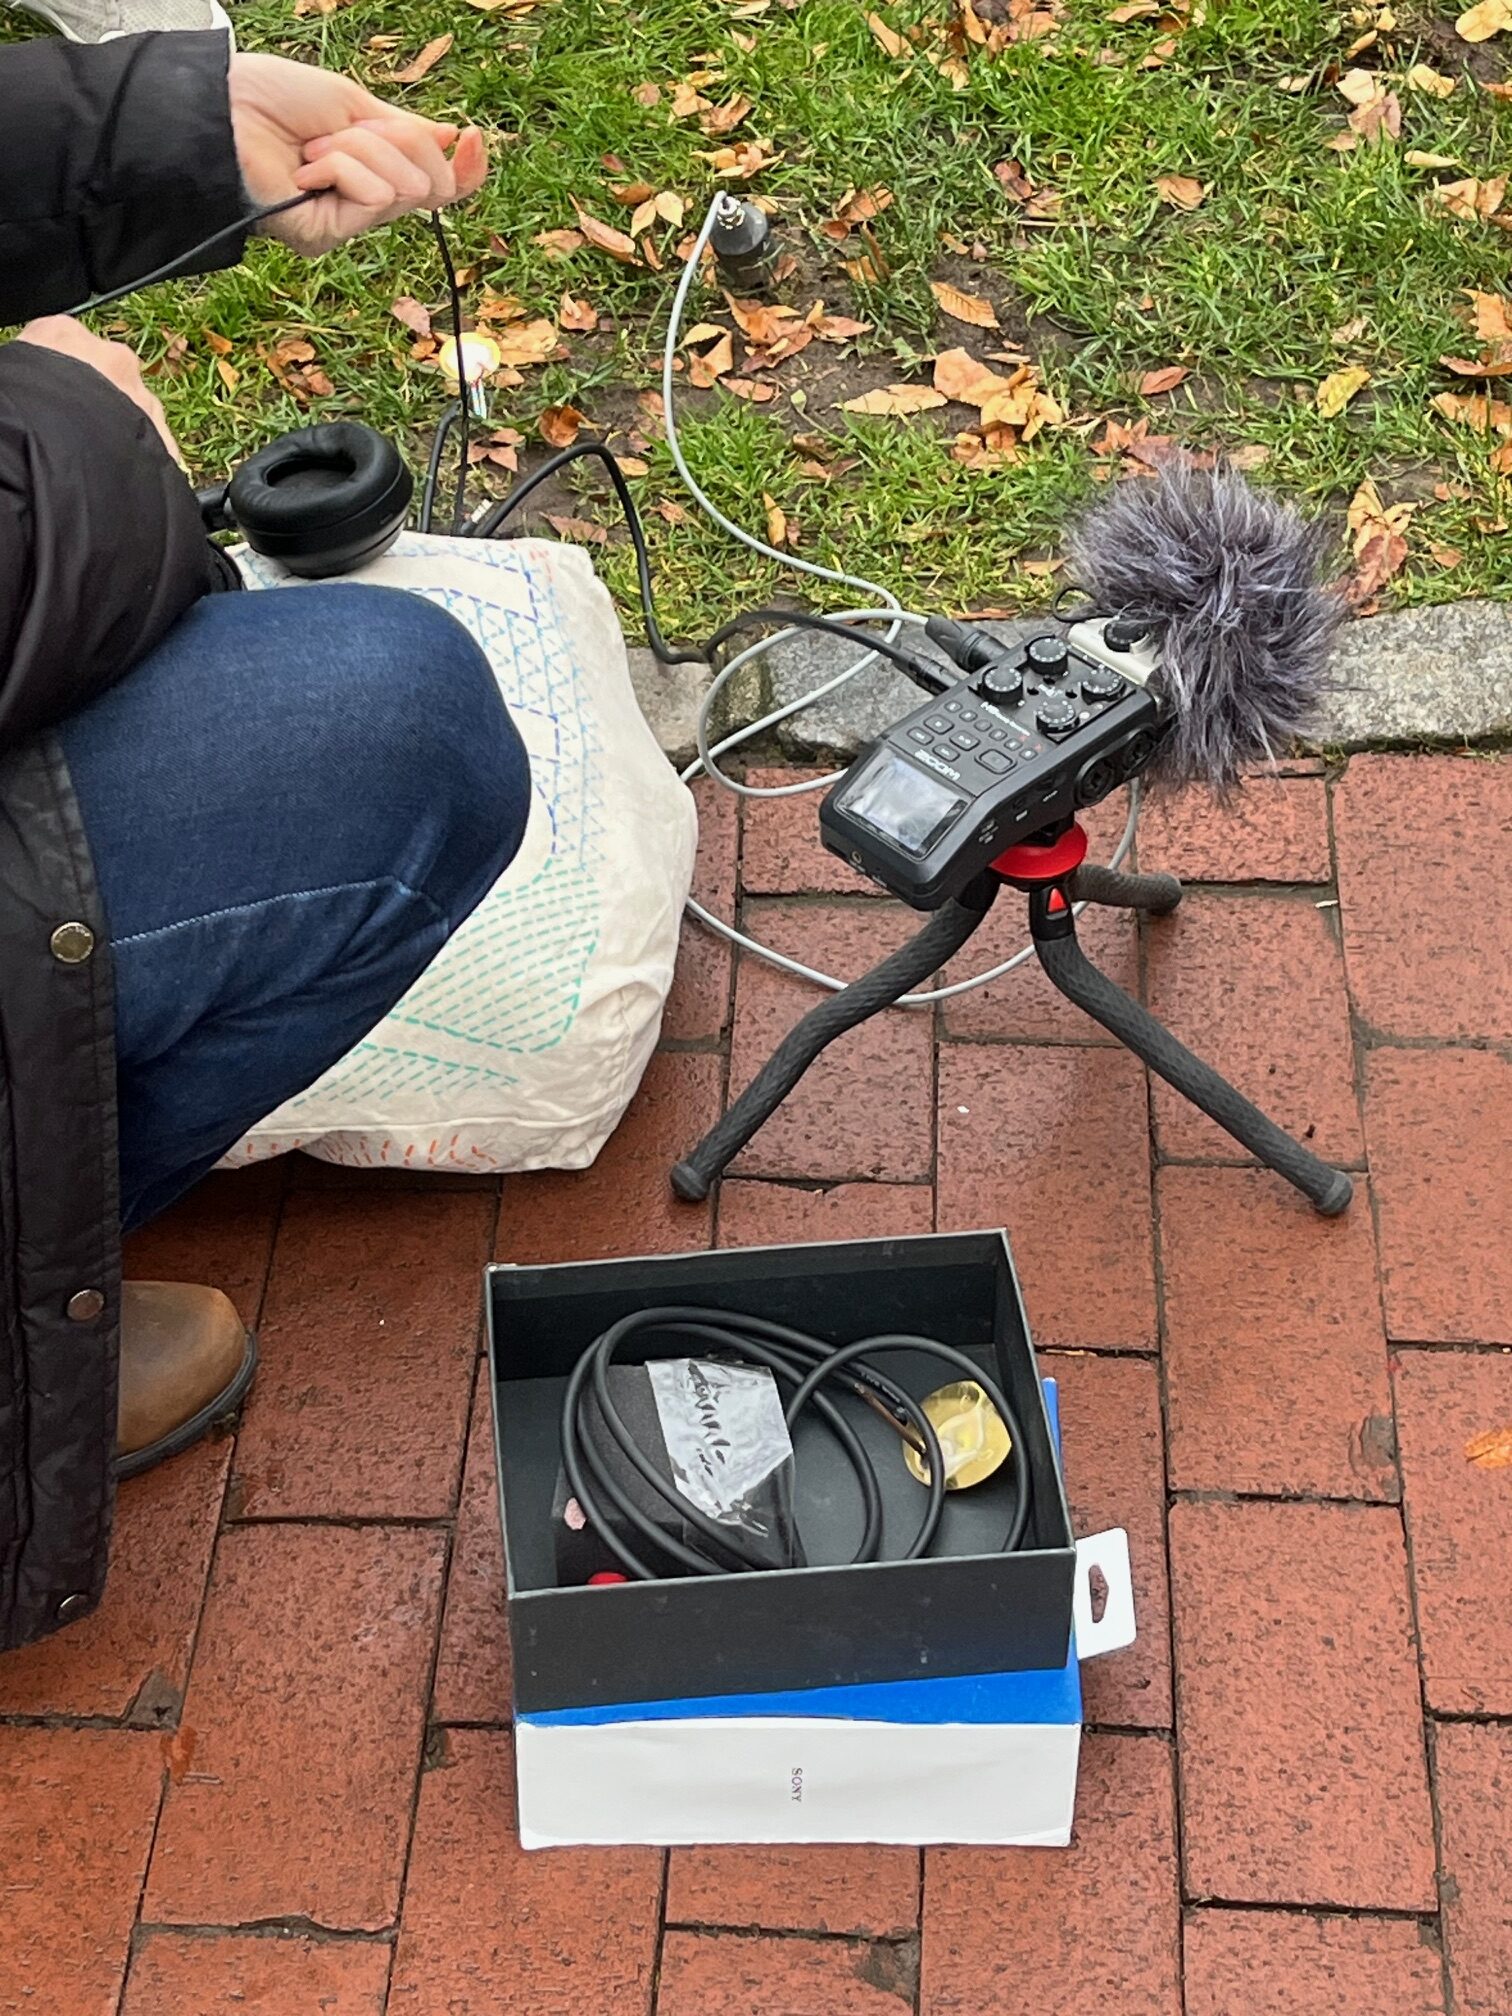 students making a sound recording on Pratt's campus using a professional microphone.